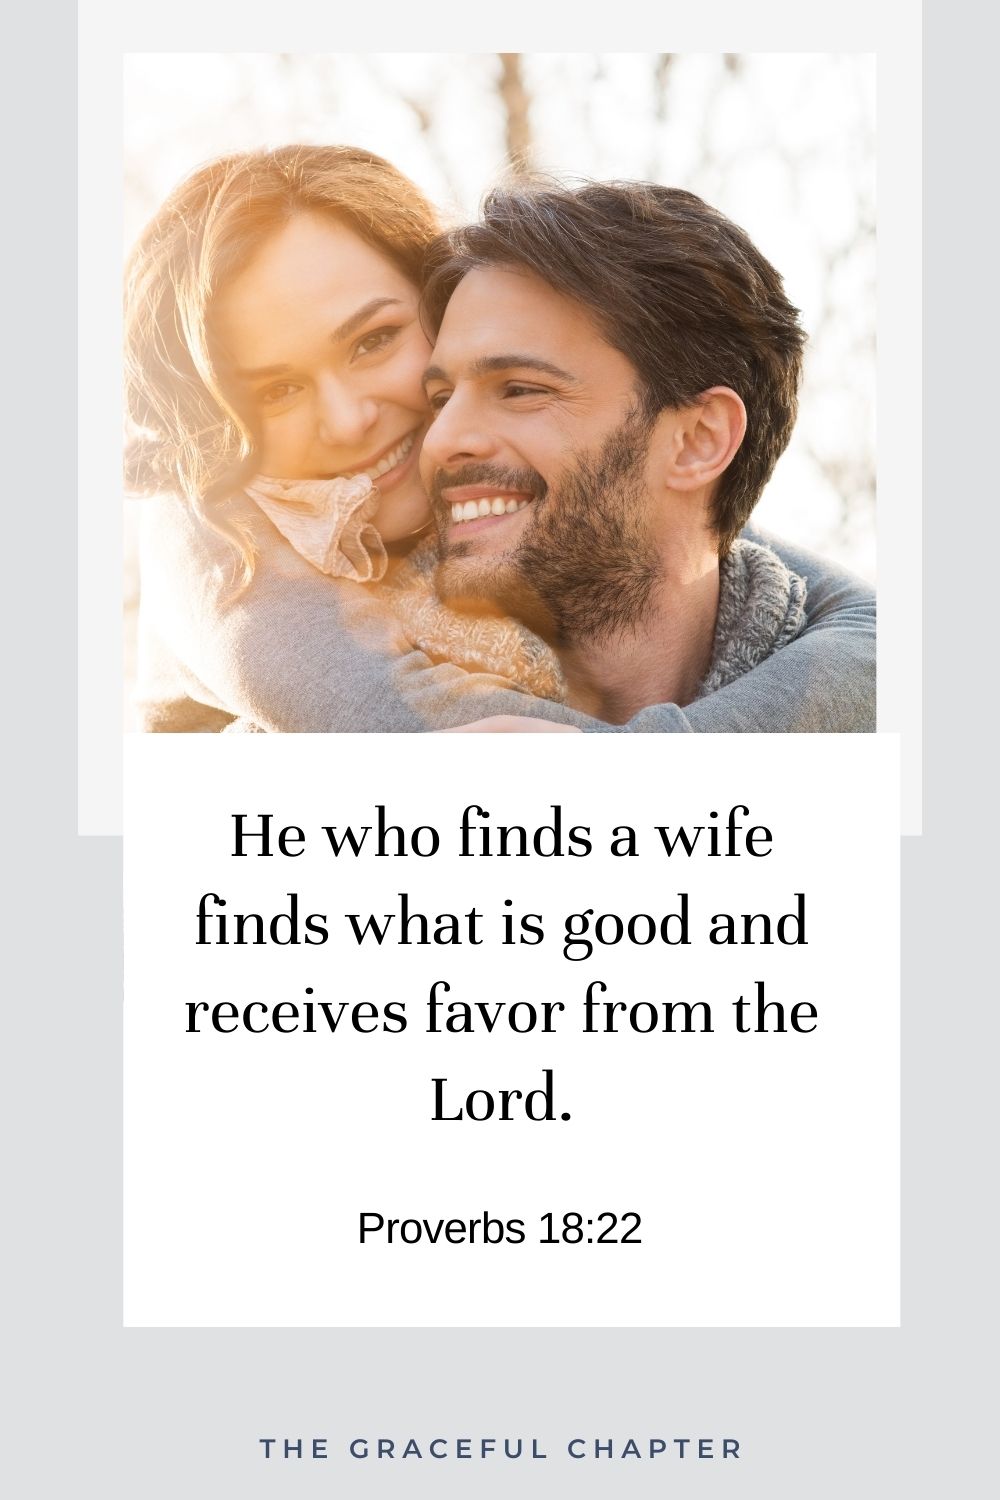 He who finds a wife finds what is good and receives favor from the Lord. Proverbs 18:22